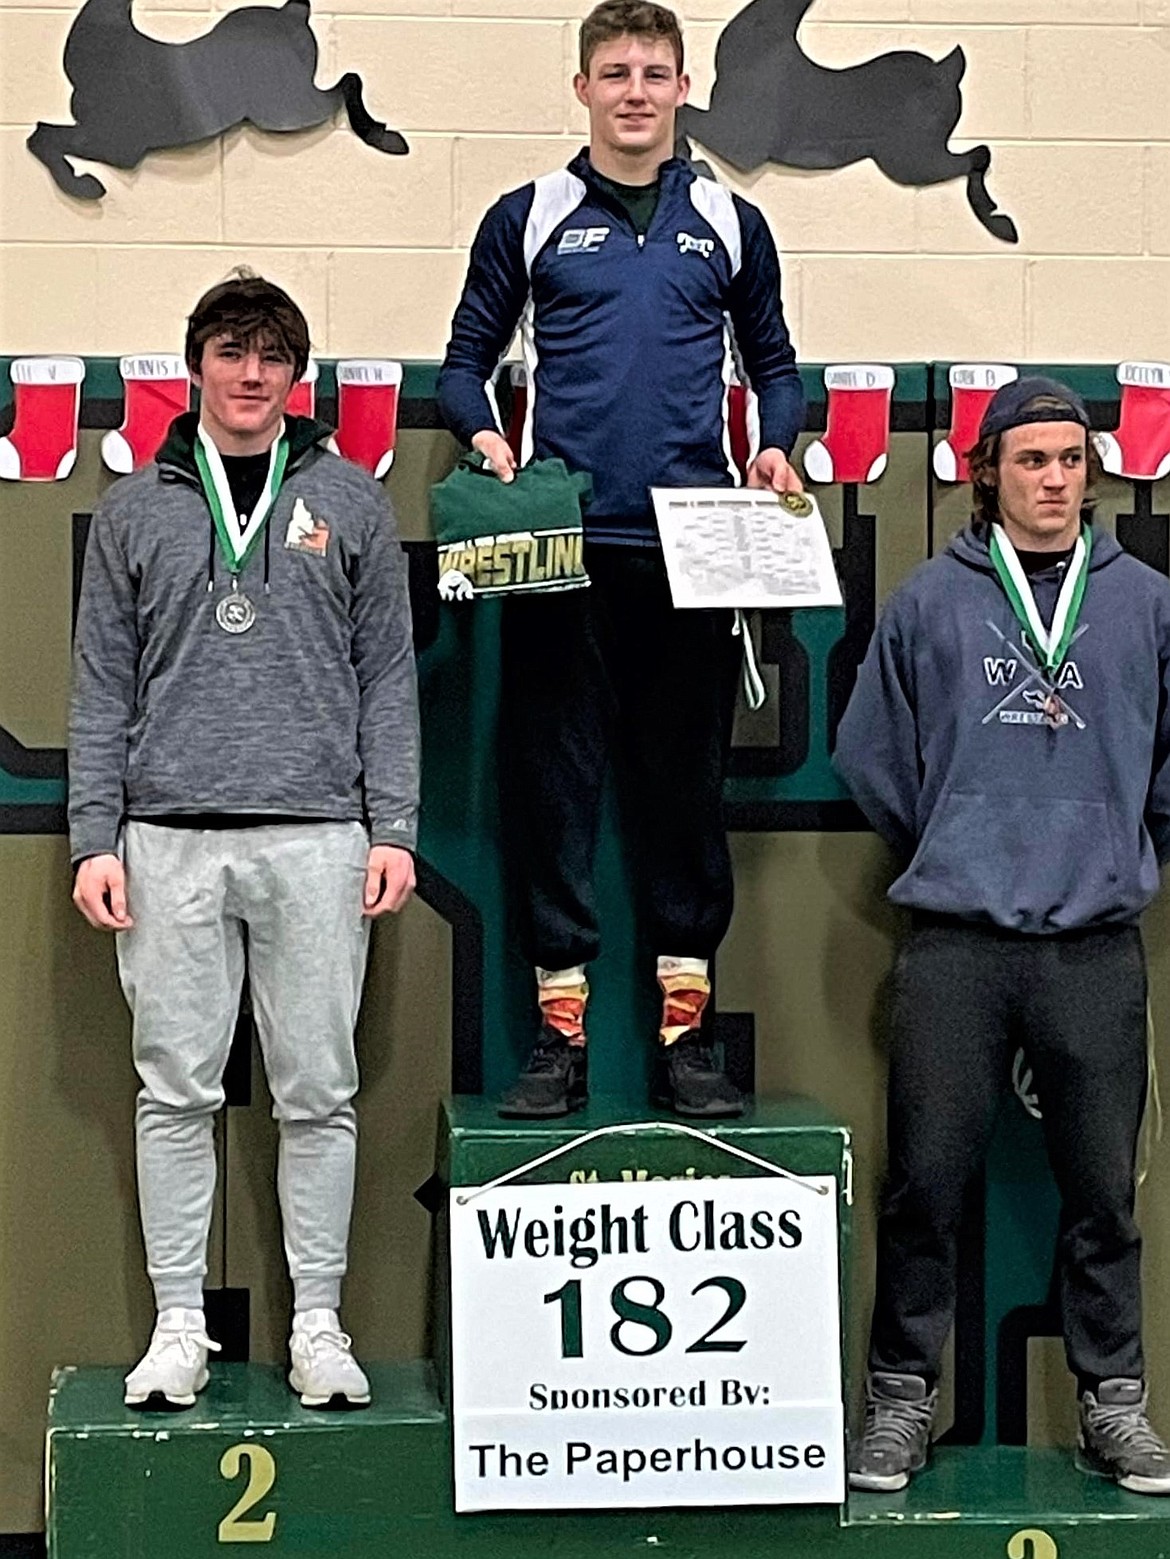 (center) Eli Richards came in first for the 182 pounds weight class at the Chad E. Ross wrestling tournament at St. Maries Dec. 20. Richards was awarded the outstanding wrestler award for tournament.